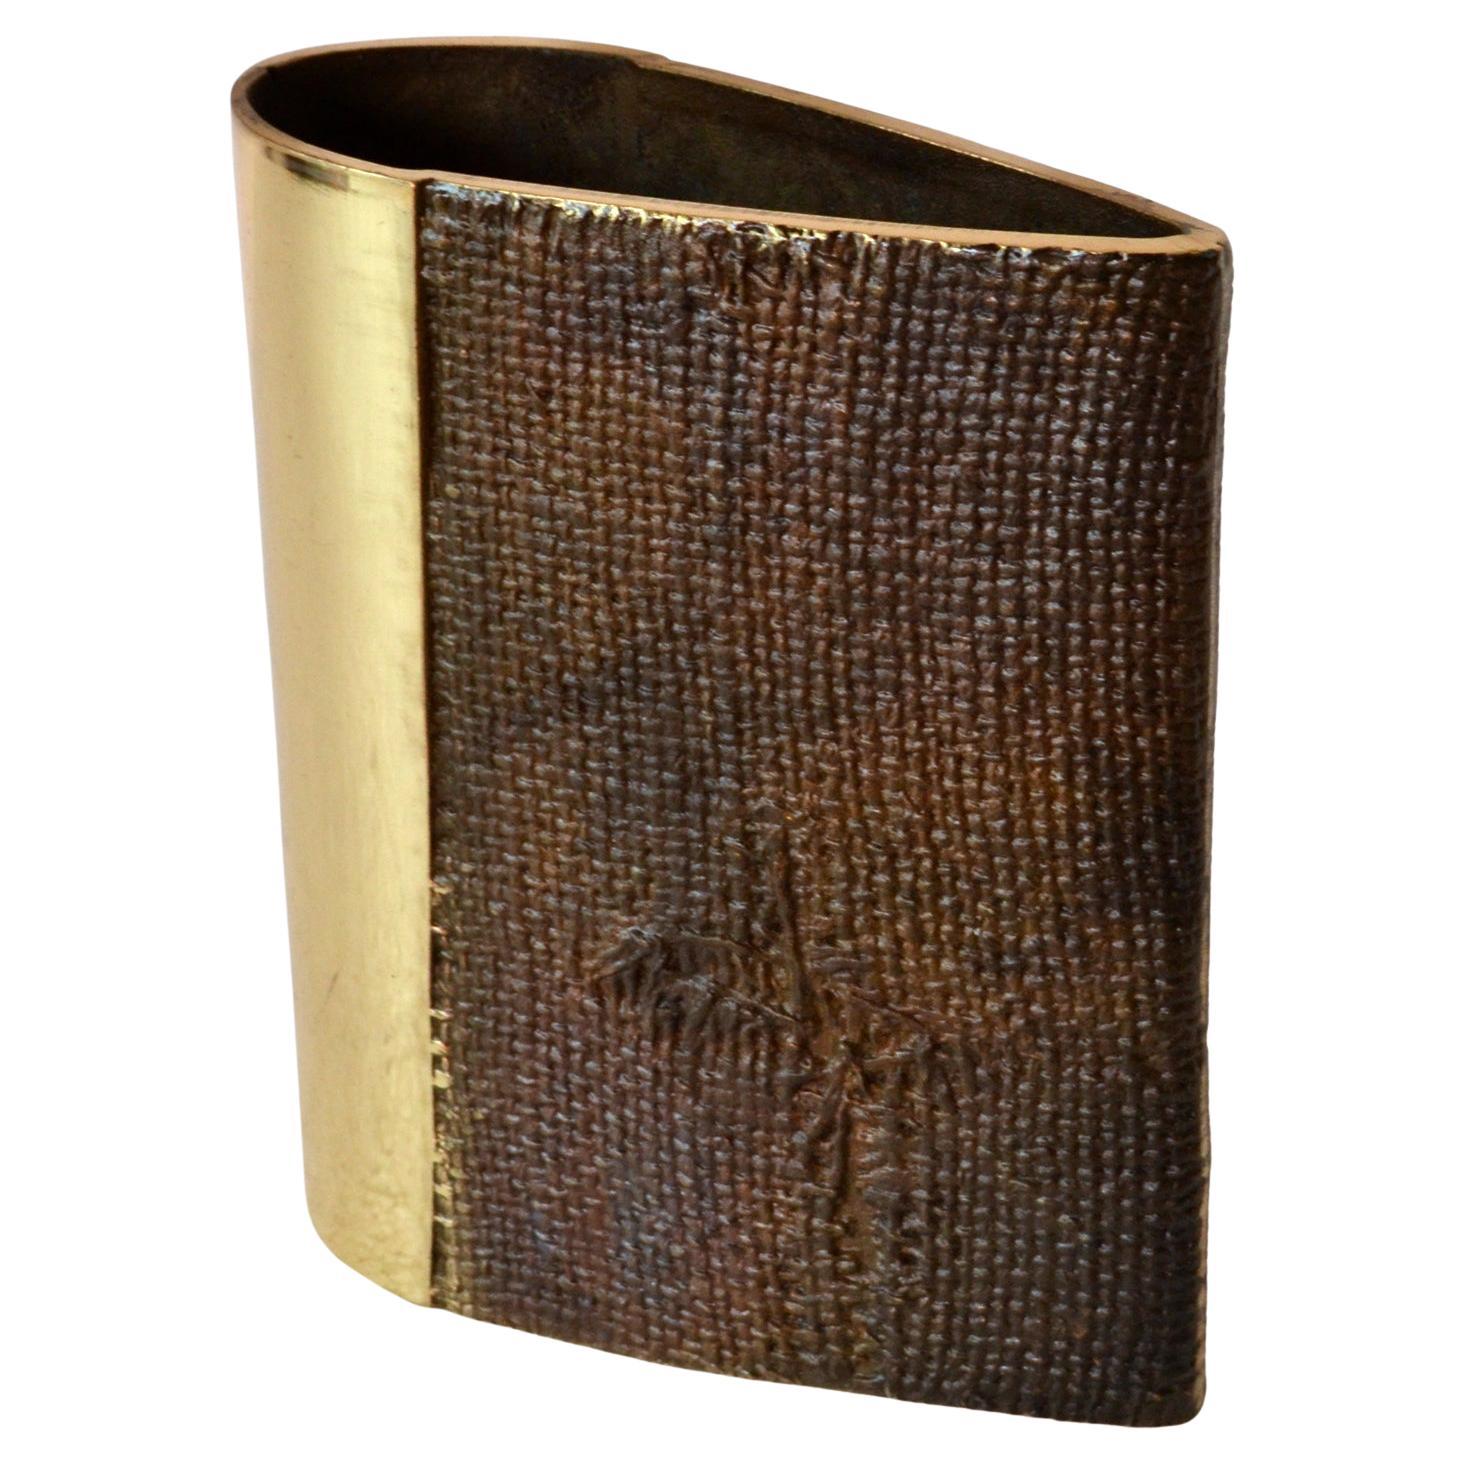 Bronze Cast Brutalist Vase by Saviato, Italy For Sale